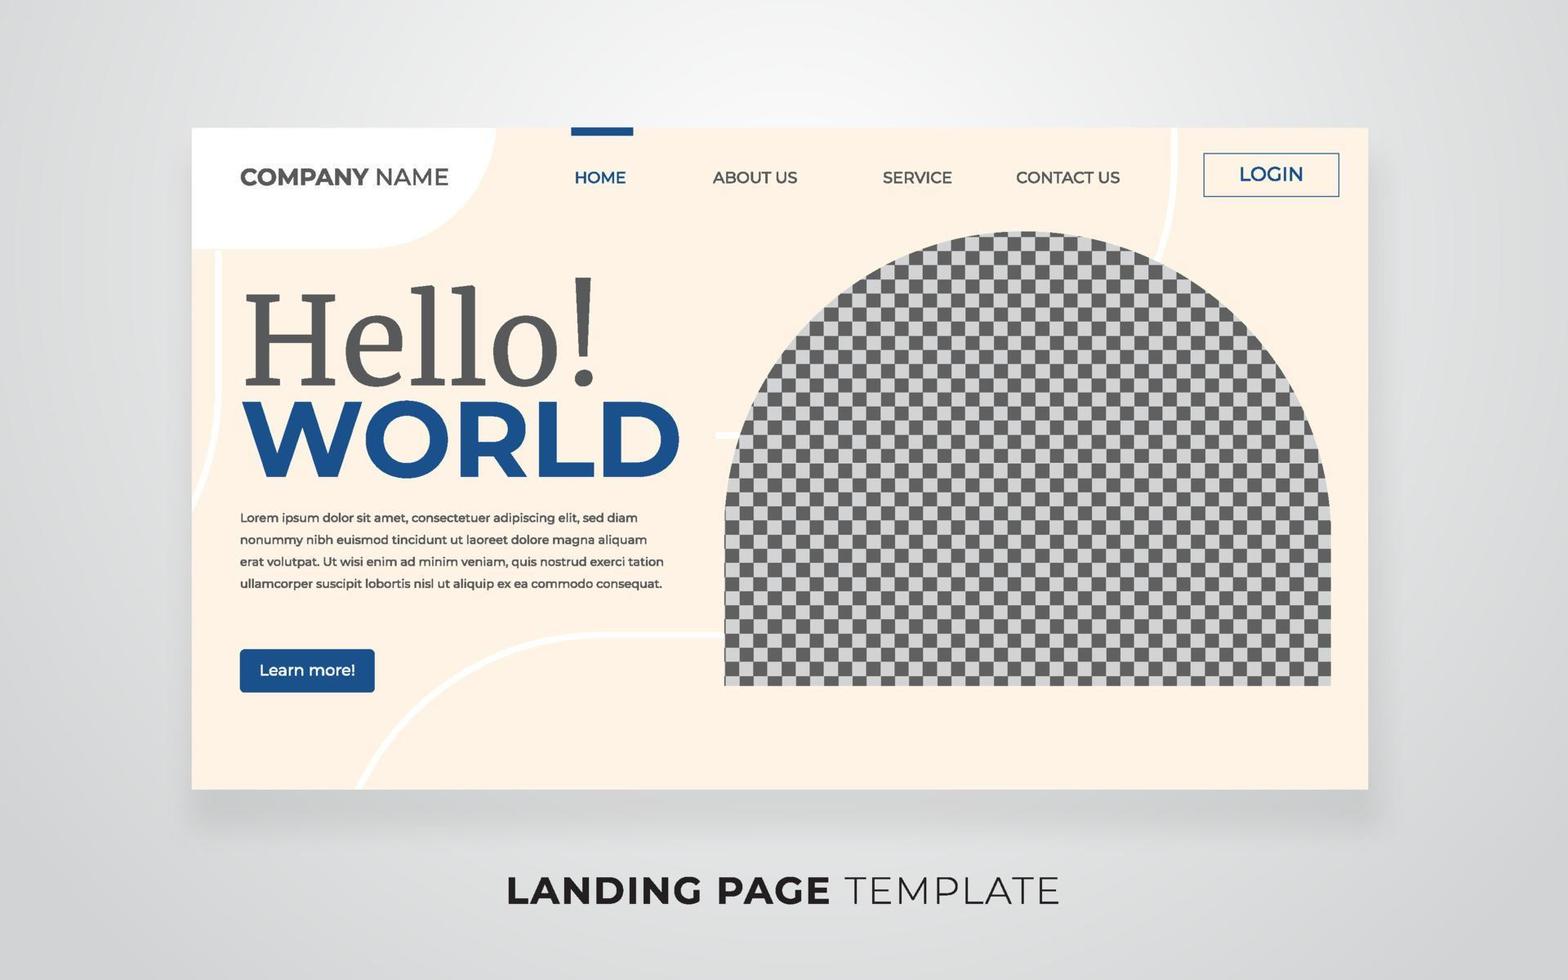 Hello world travel landing page template vector